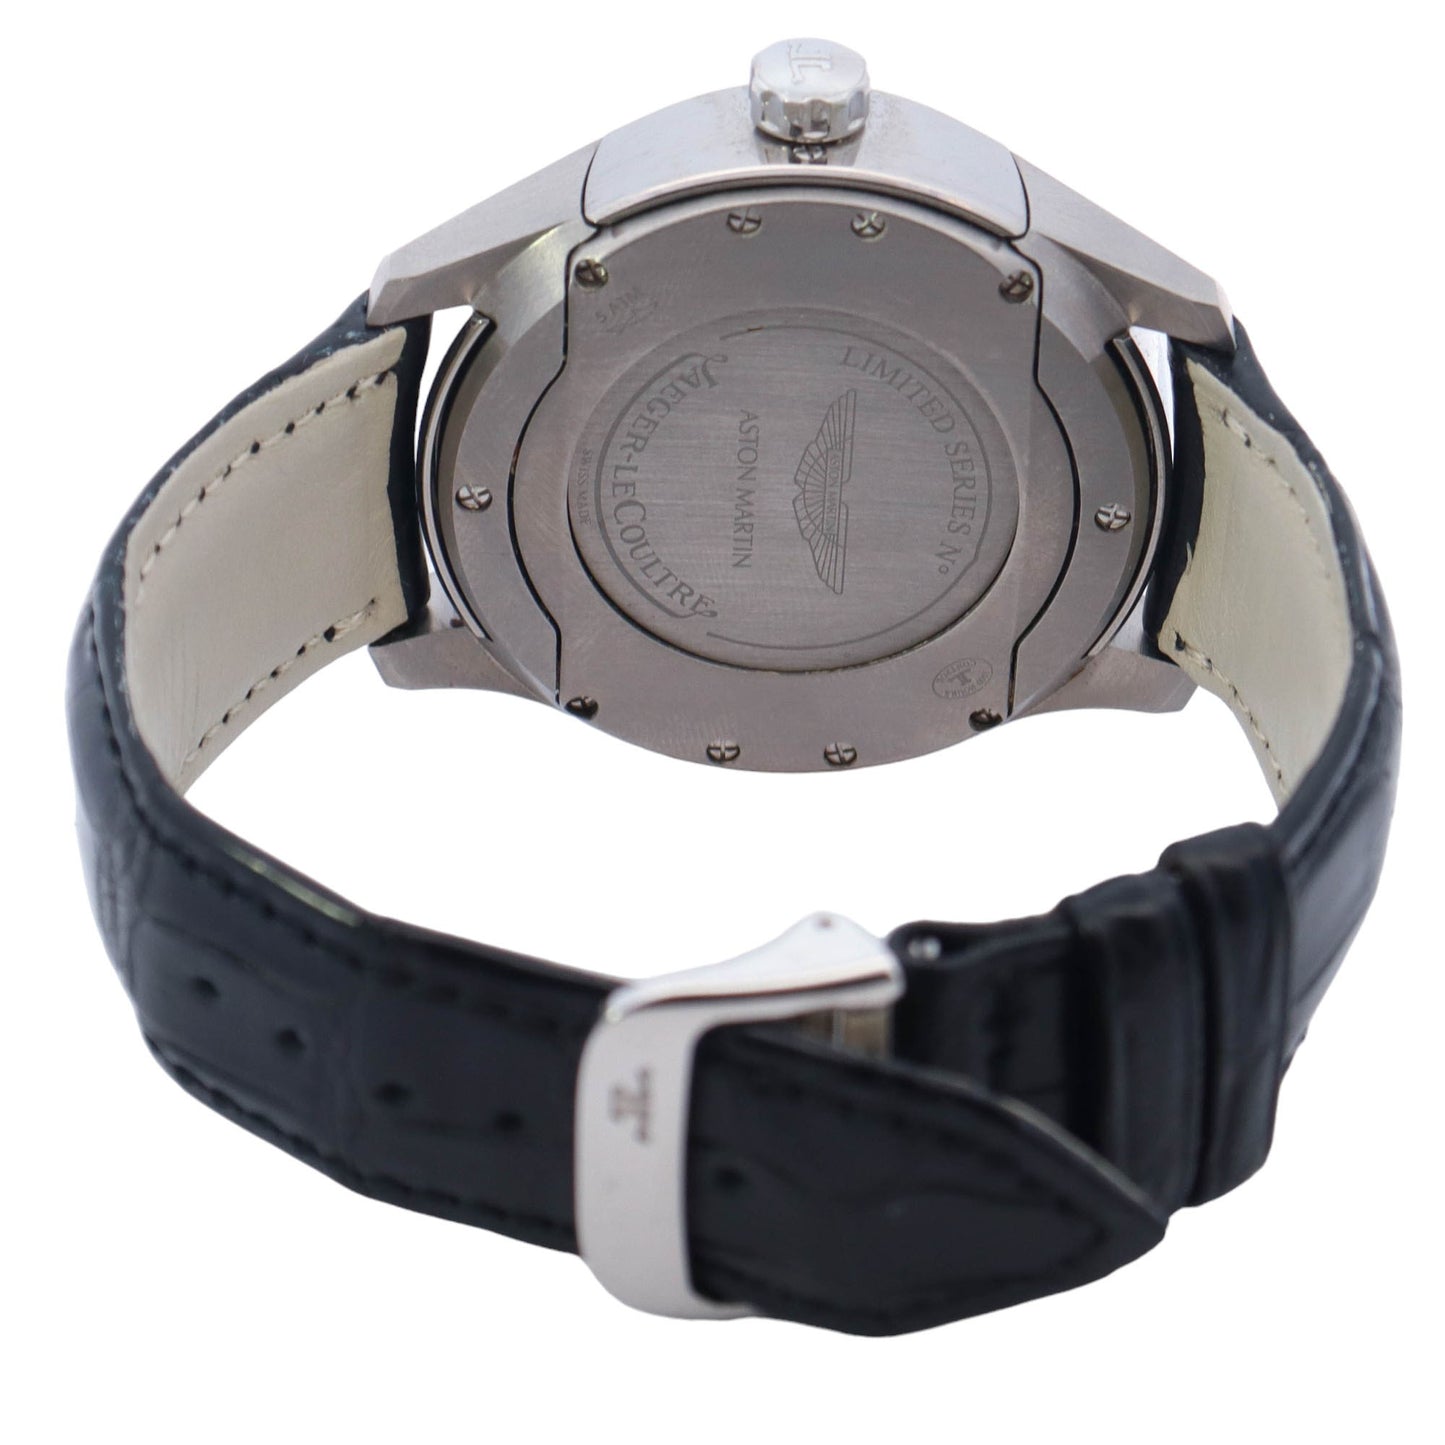 Jaeger-LeCoultre AMVOX Titanium & Steel 44mm Silver Roman Dial Watch Reference# Q192T440